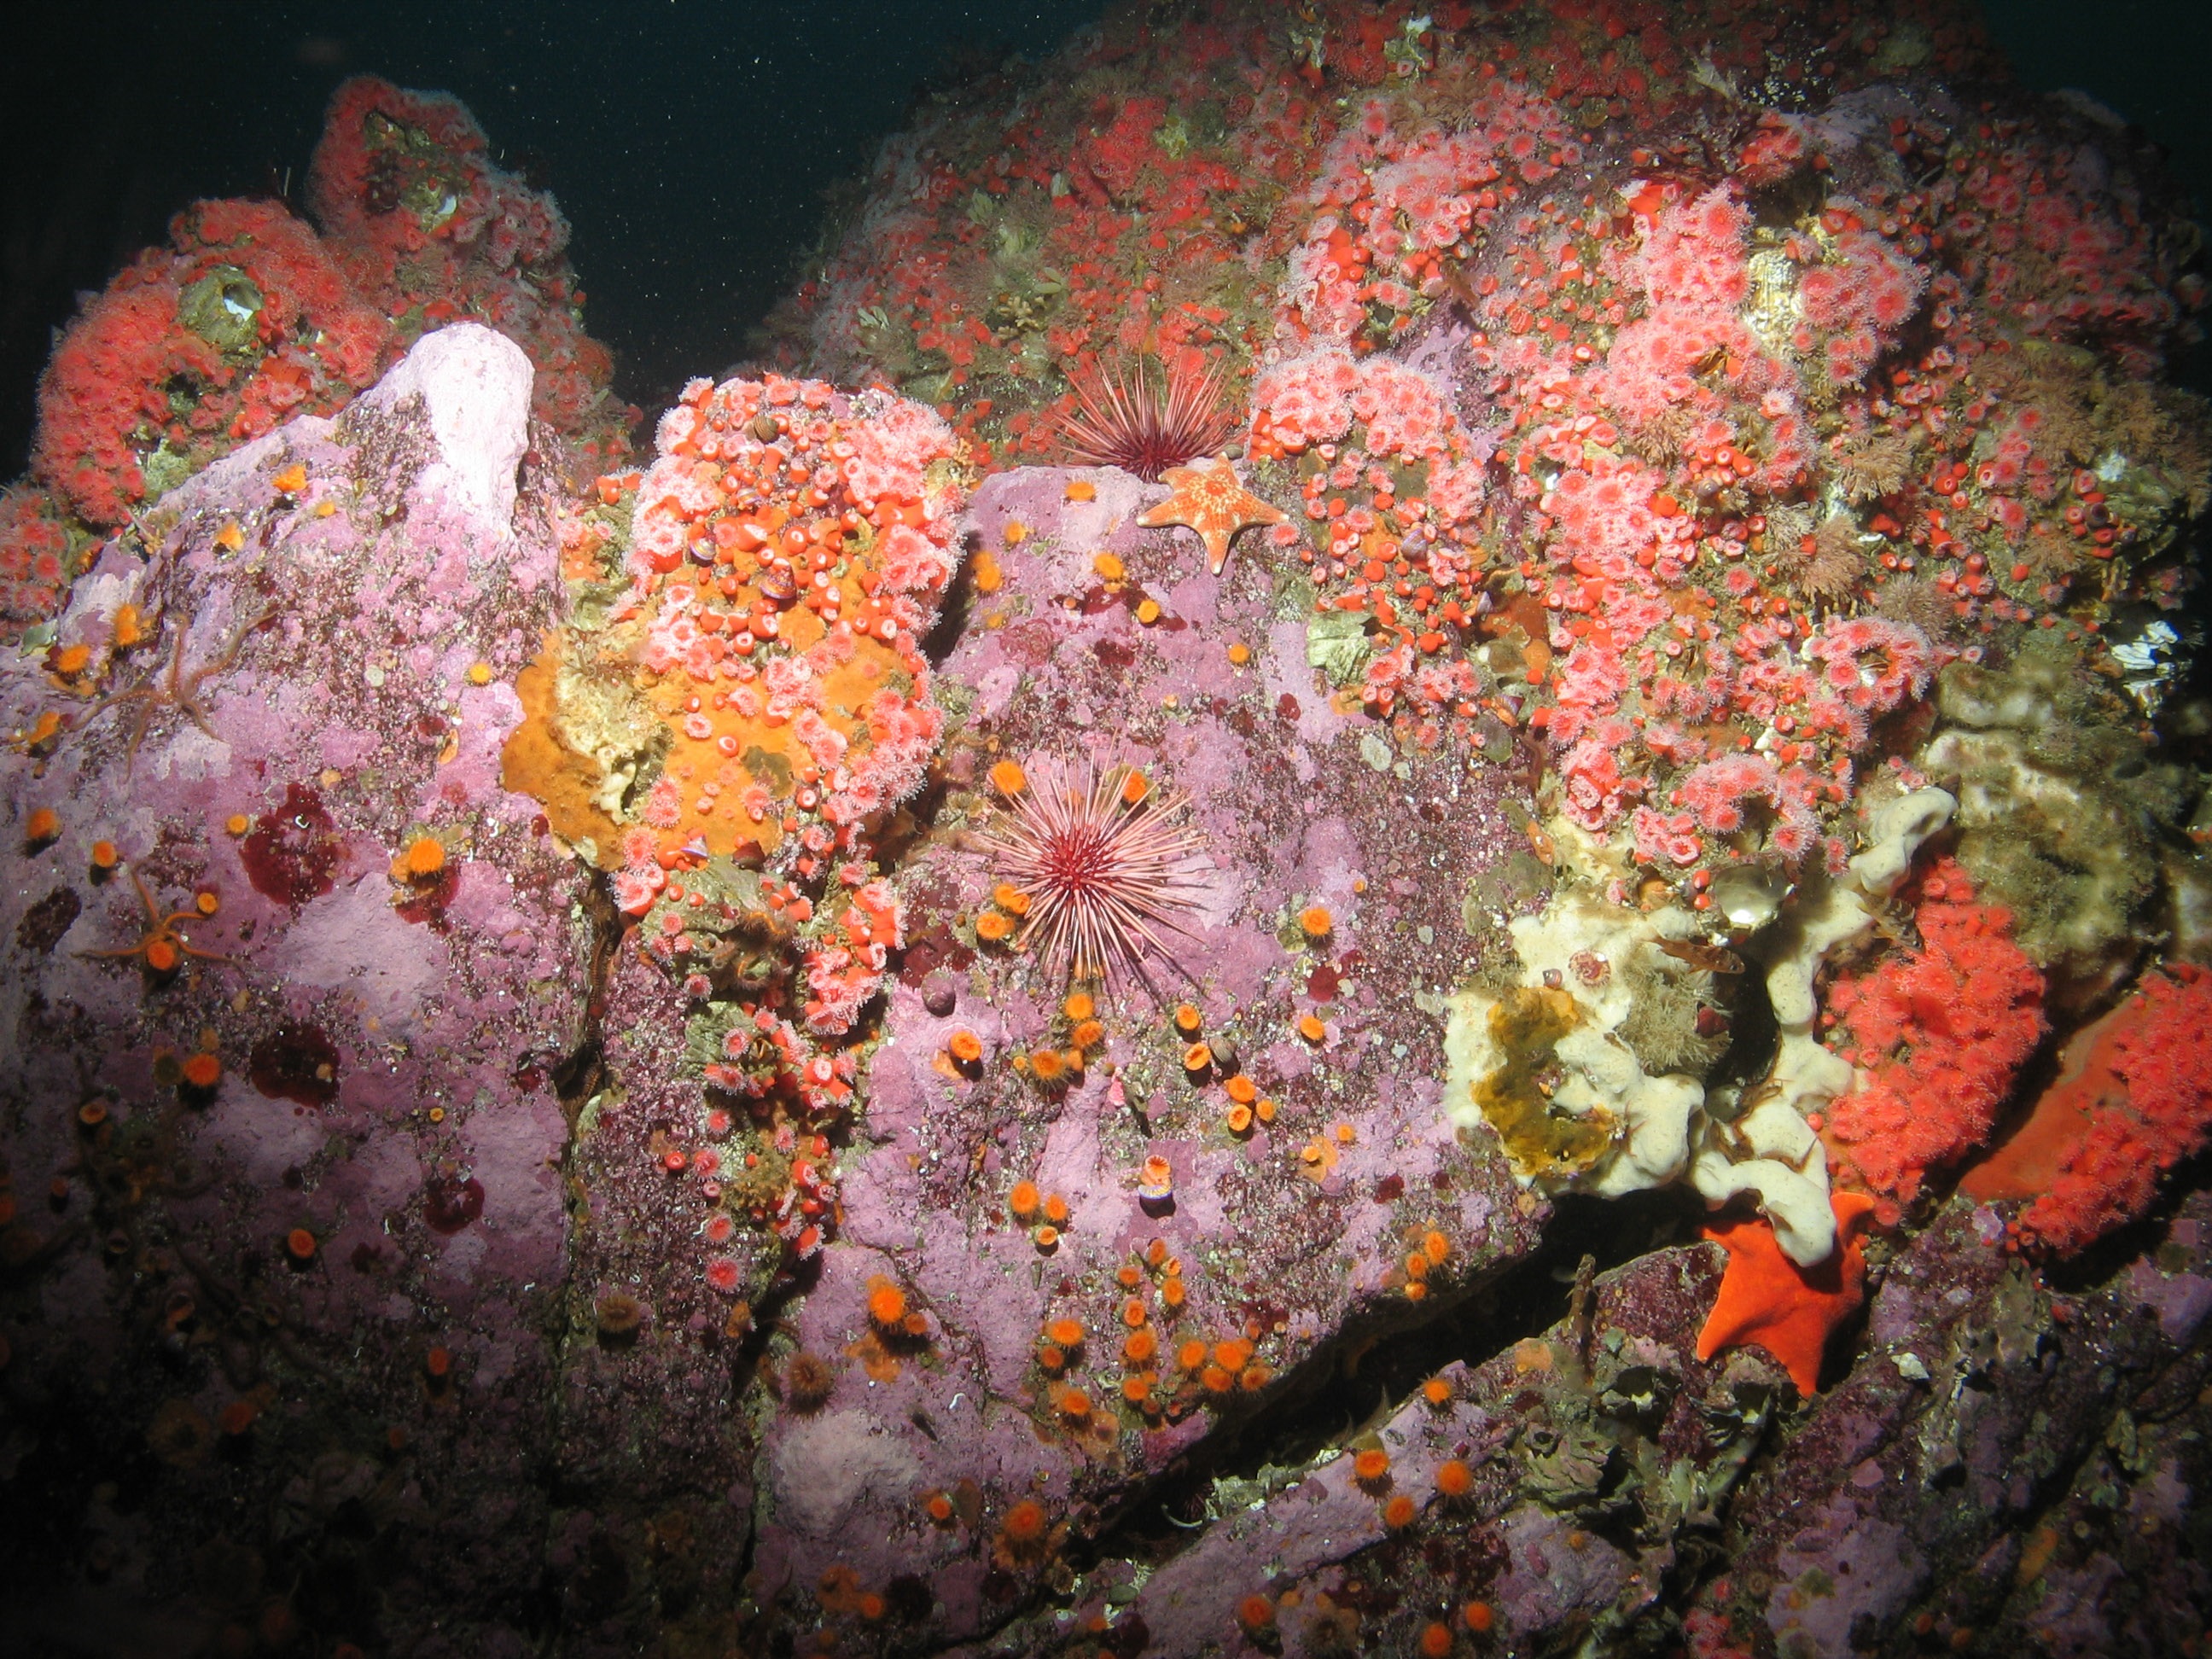 Underwater rocky reef with anemones, sea urchins, and sea stars